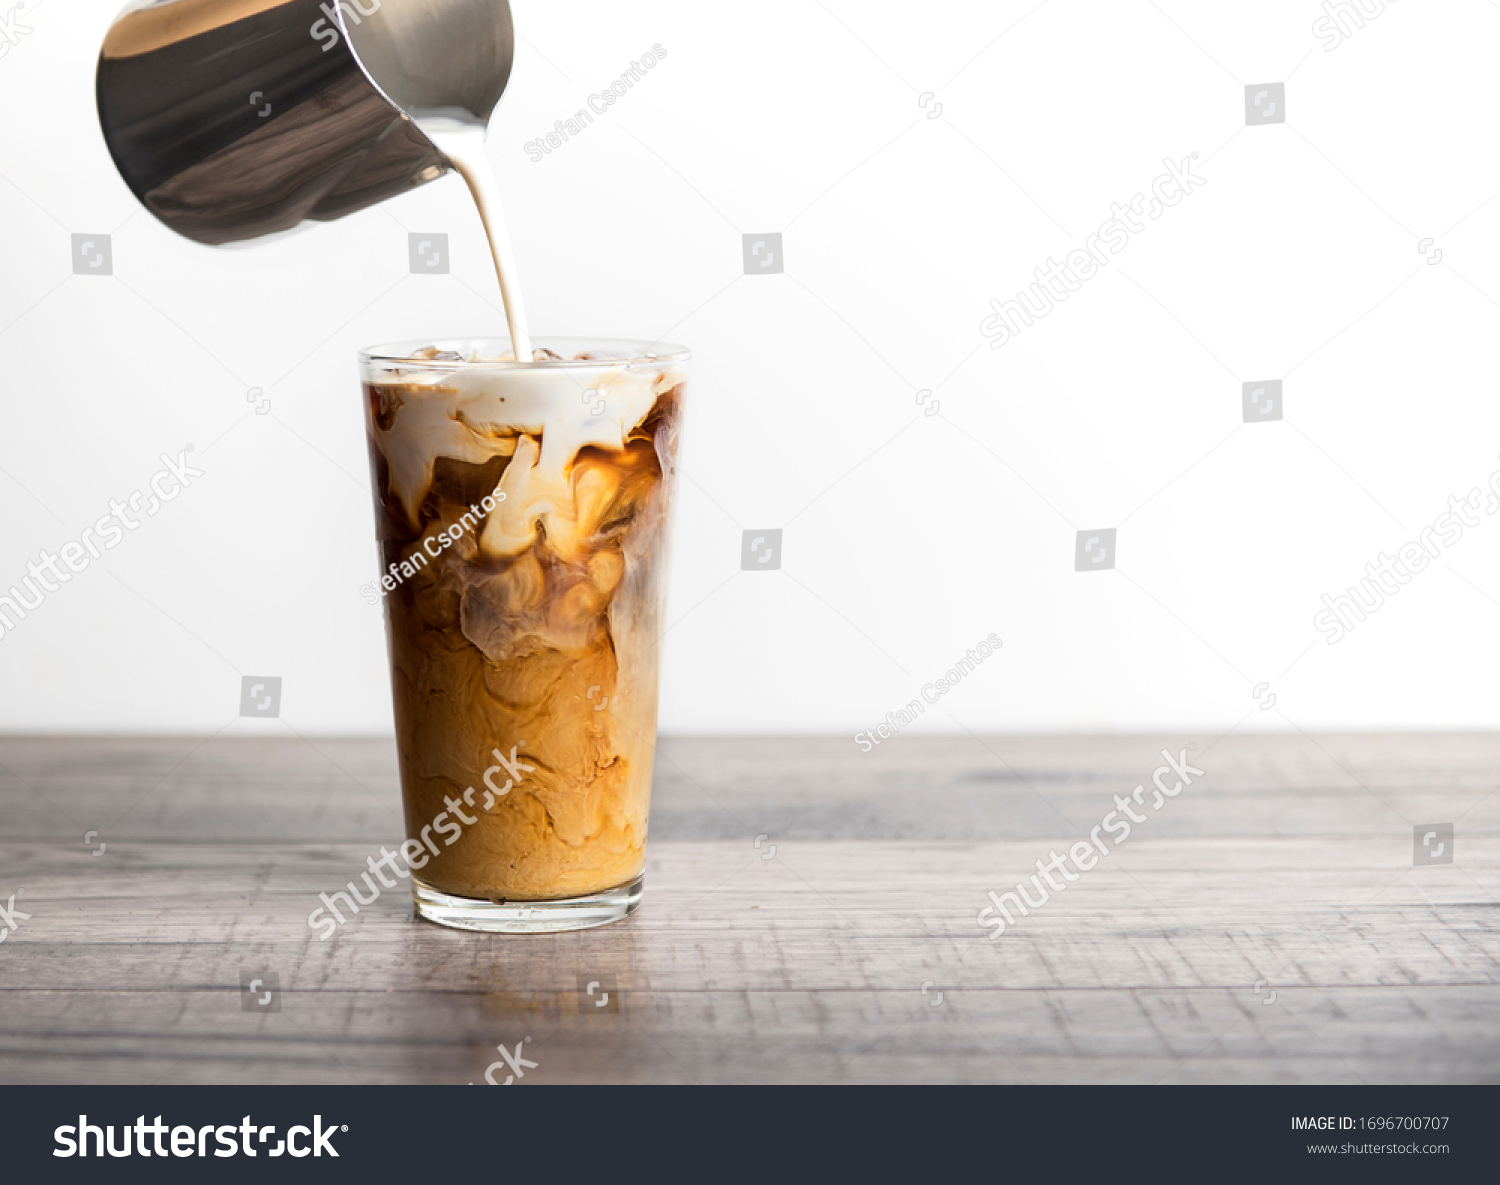 Ice coffee latte with cream being poured into it showing the texture and refreshing look of the drink, with a clean background. #1696700707